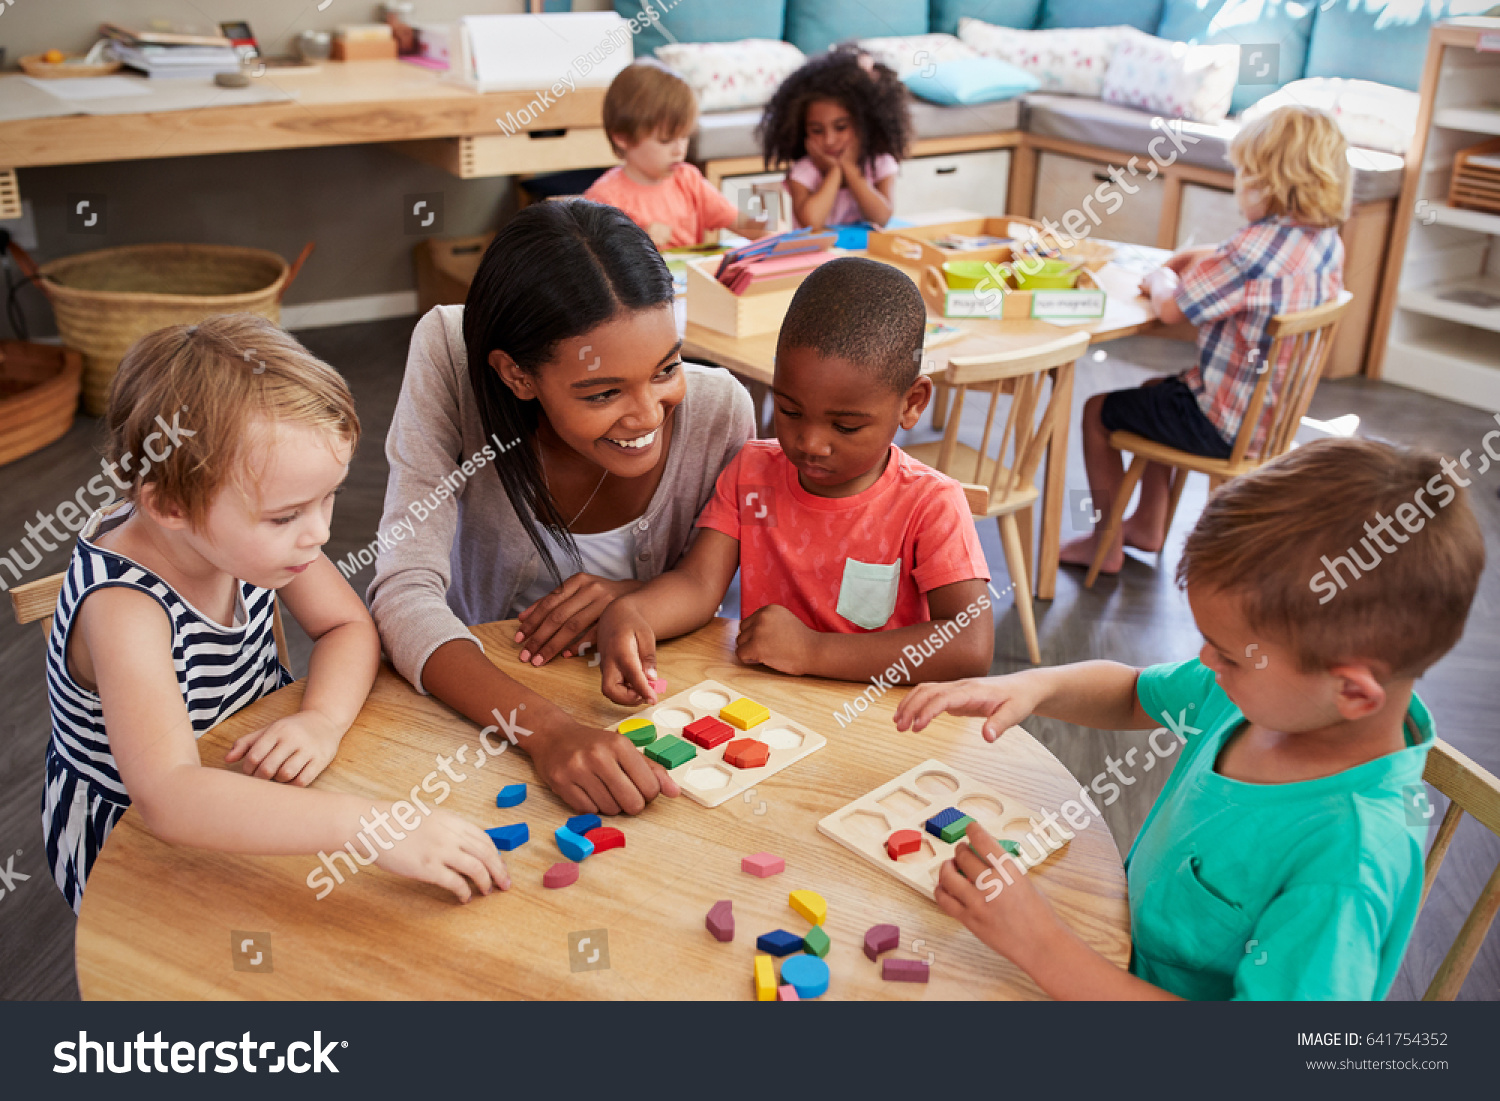 Teacher And Pupils Using Wooden Shapes In Montessori School #641754352